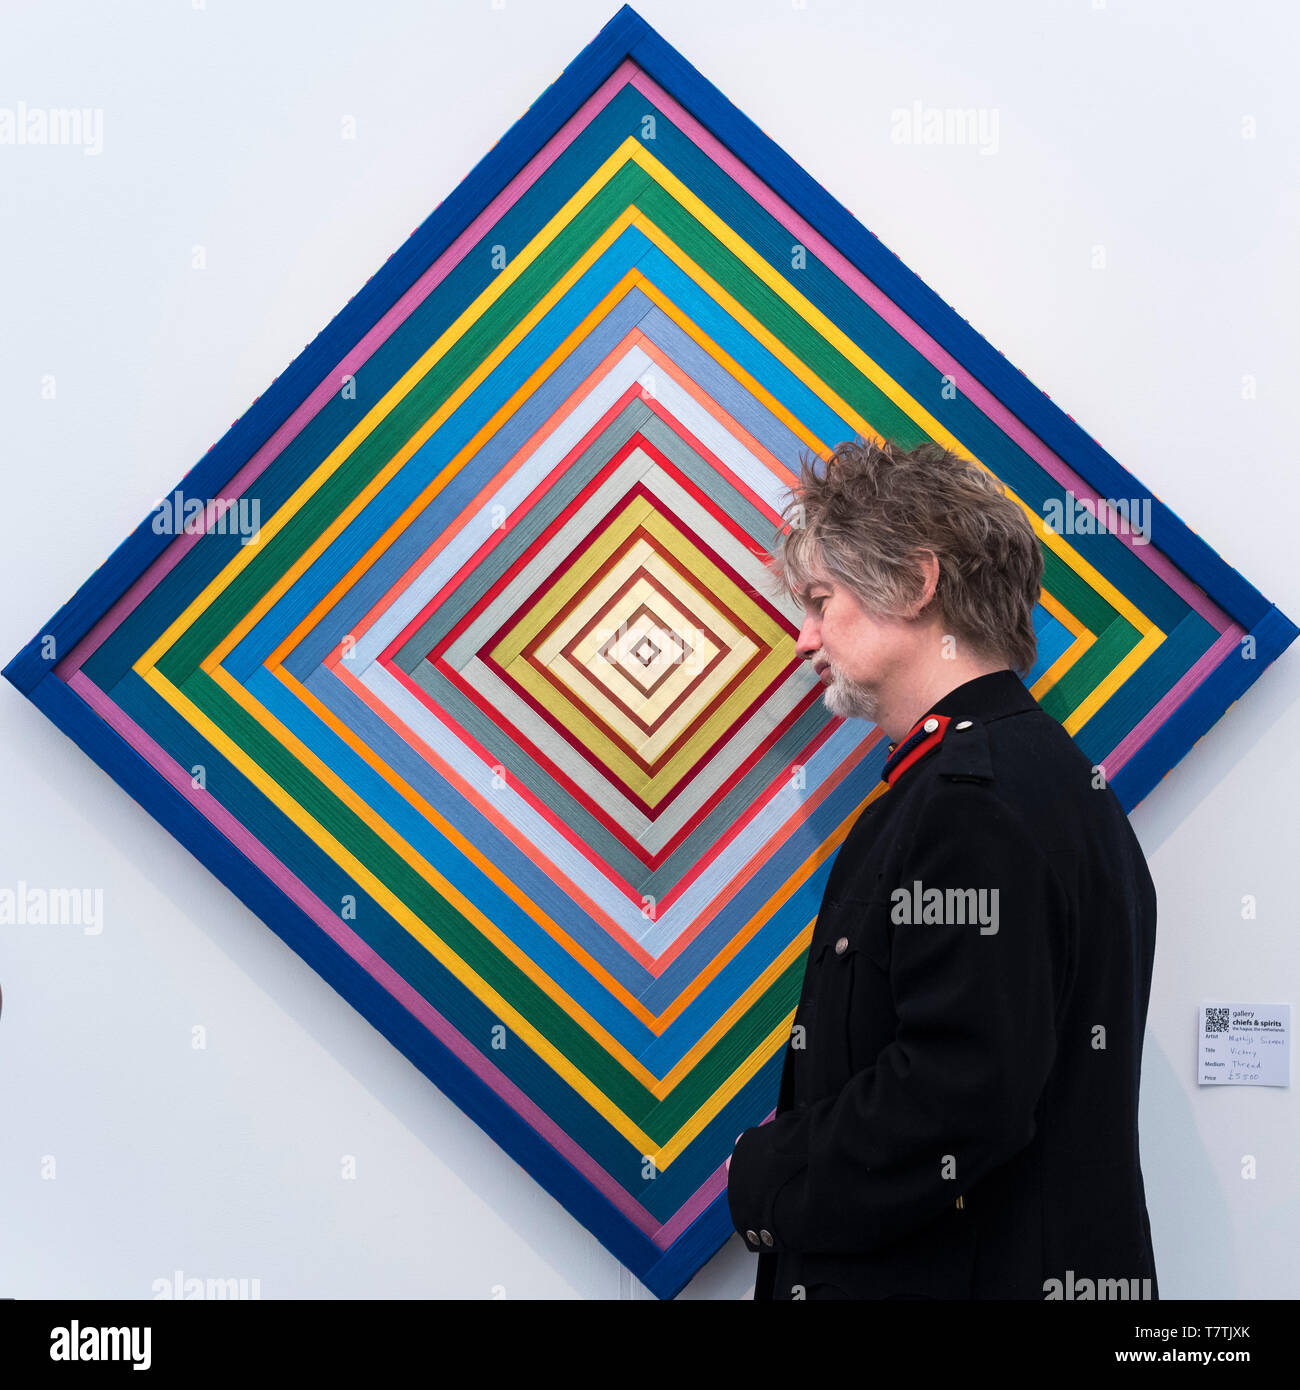 London, UK.  9 May 2019. A visitor views 'Victory' by Mathijs Siemens at the Chiefs and Spirits gallery on the opening day of the Affordable Art Fair in Hampstead Heath.  The show runs until May 12 and features works of art for all tastes from over 100 international galleries at prices ranging from GBP100 to GBP6,000. Credit: Stephen Chung / Alamy Live News Stock Photo